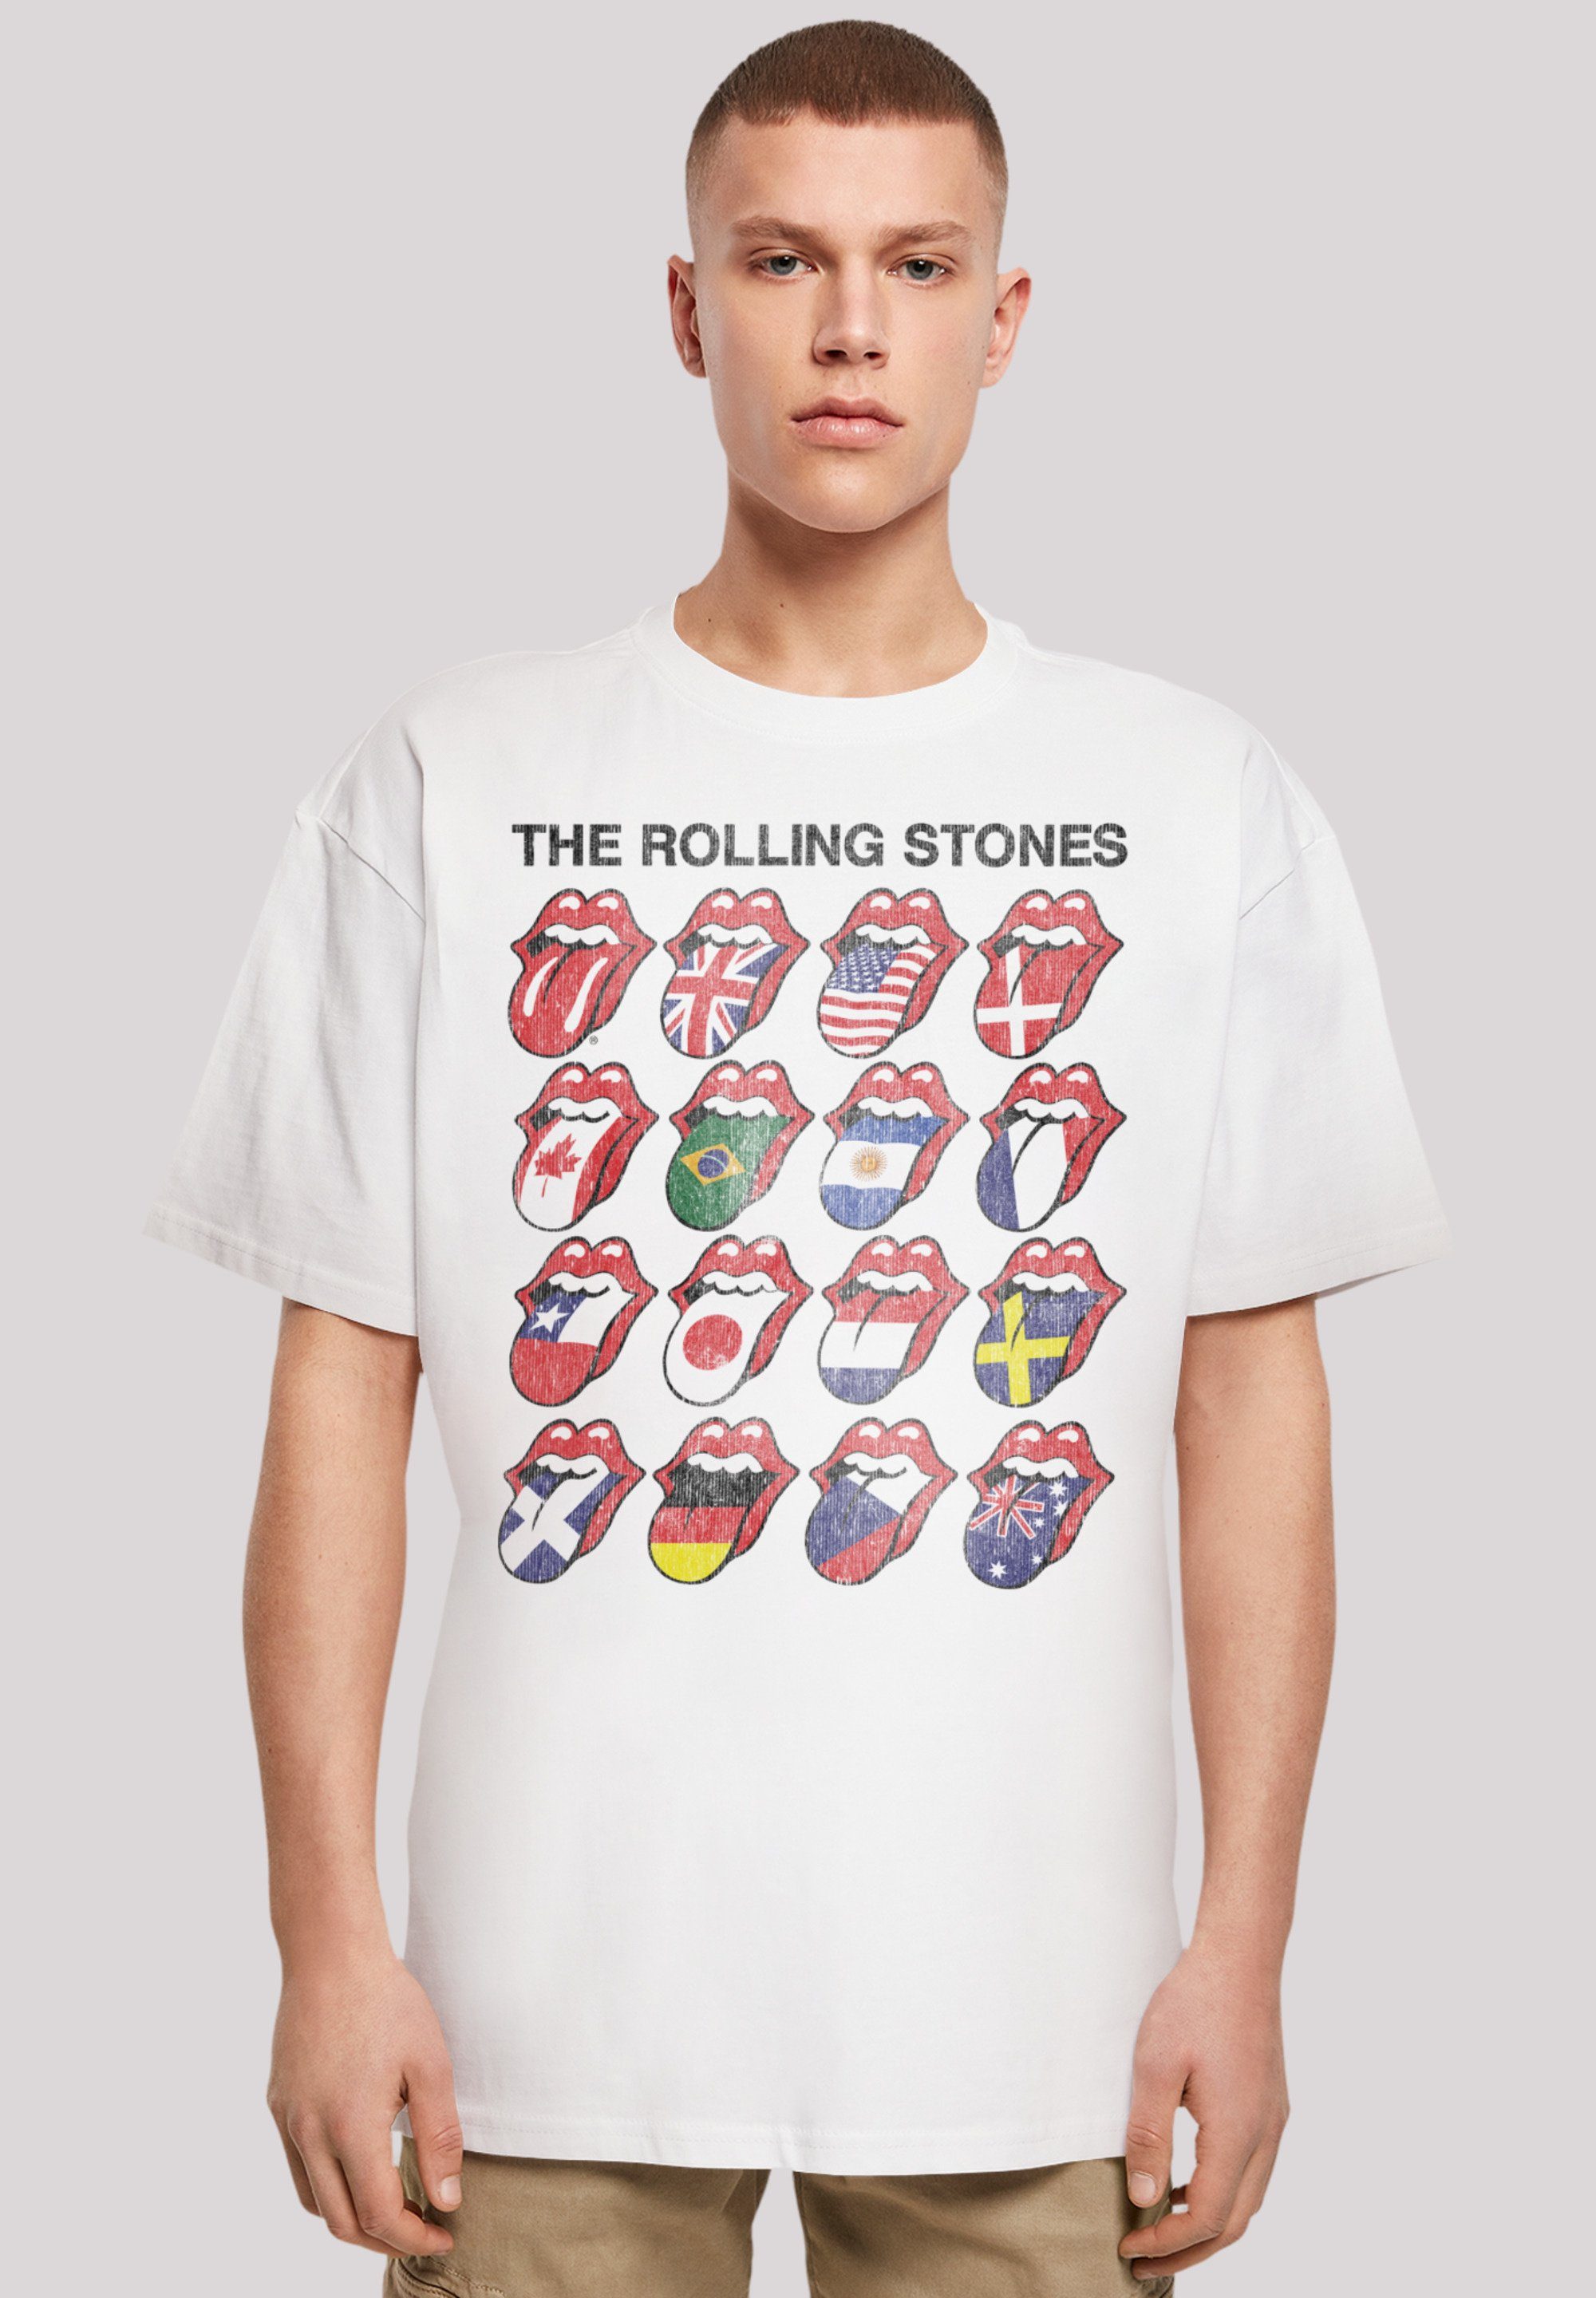 F4NT4STIC T-Shirt The Rolling Stones Voodoo Lounge Tongues Musik, Band, Logo weiß